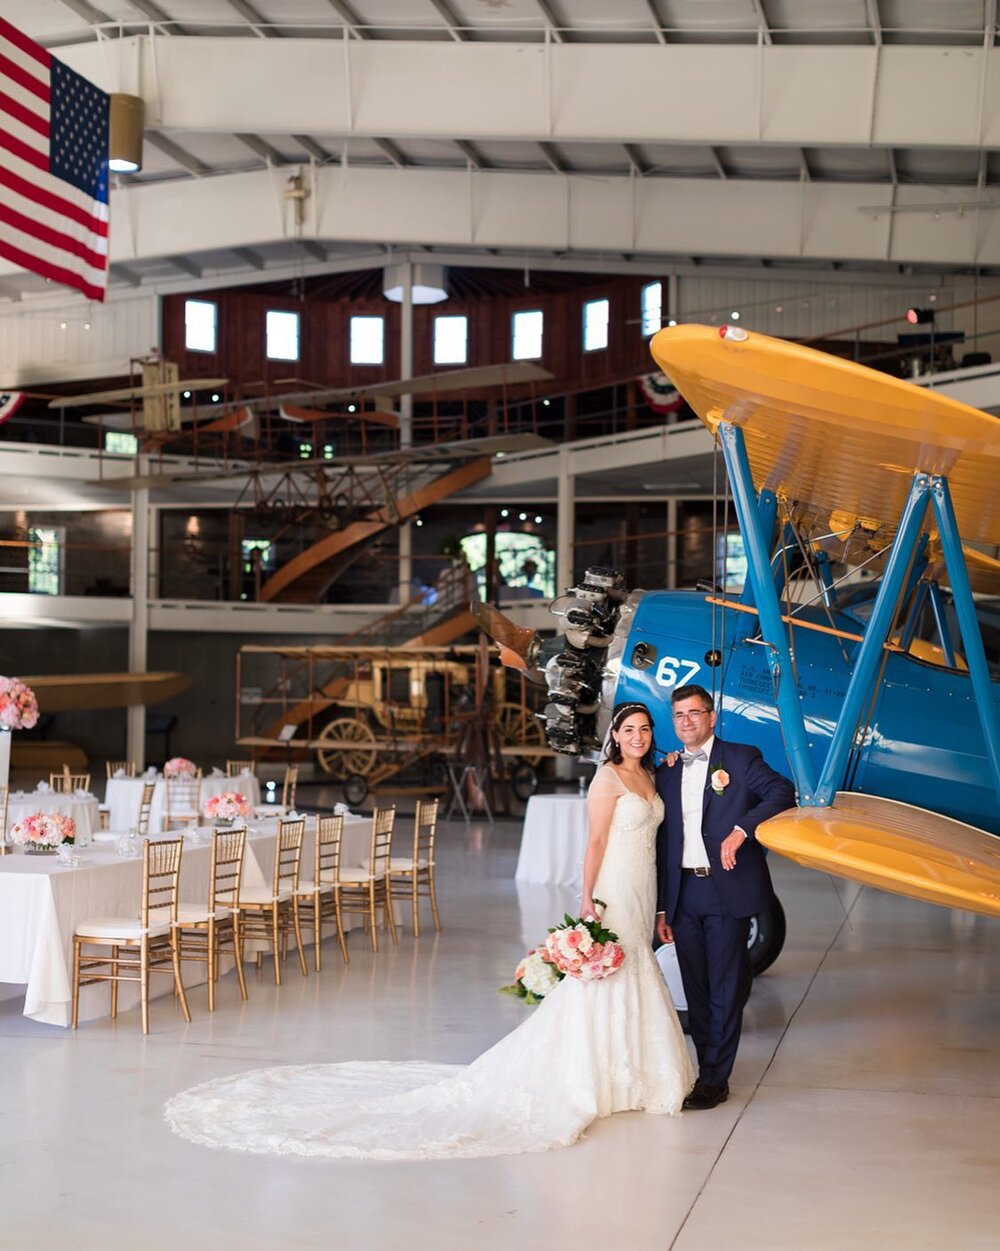 Christina and Peter were able to make last minute adjustments to their (already) rescheduled wedding and found this incredibly cool venue just in the nick of time. Whaaaat. 🙌🏻 ✈️✨

_

✈️ Venue: @americanheritagemuseum 
🍴Caterer: @tastings_caterers